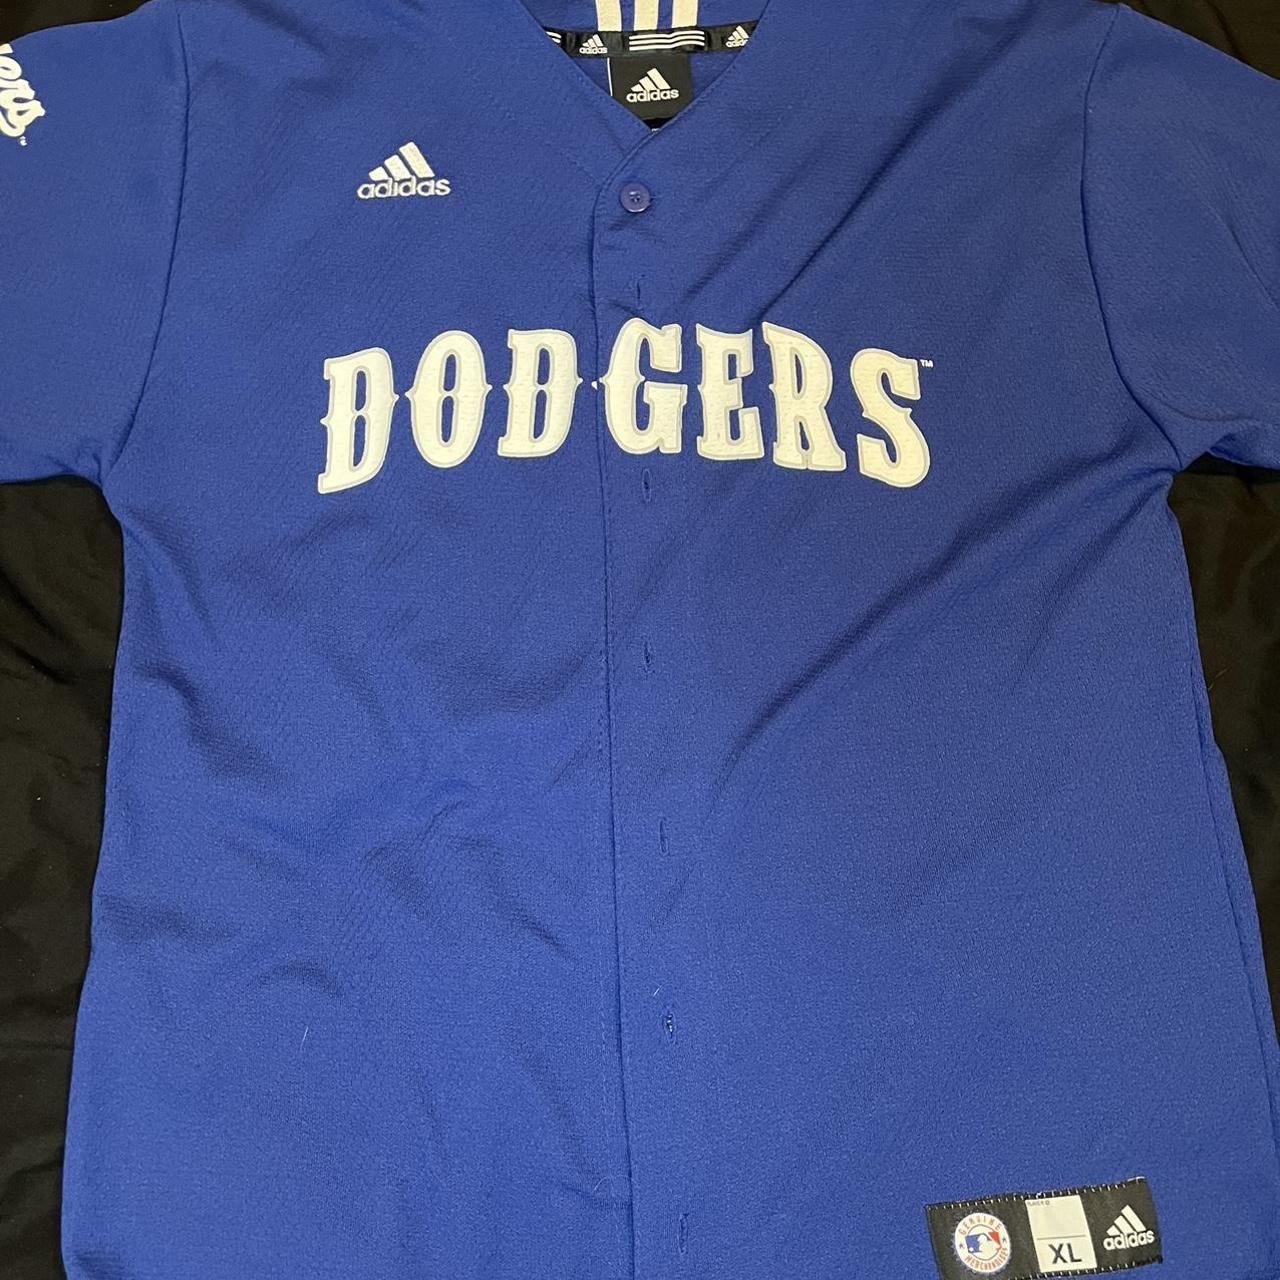 Los Angeles Dodgers Adidas button up Jersey was - Depop